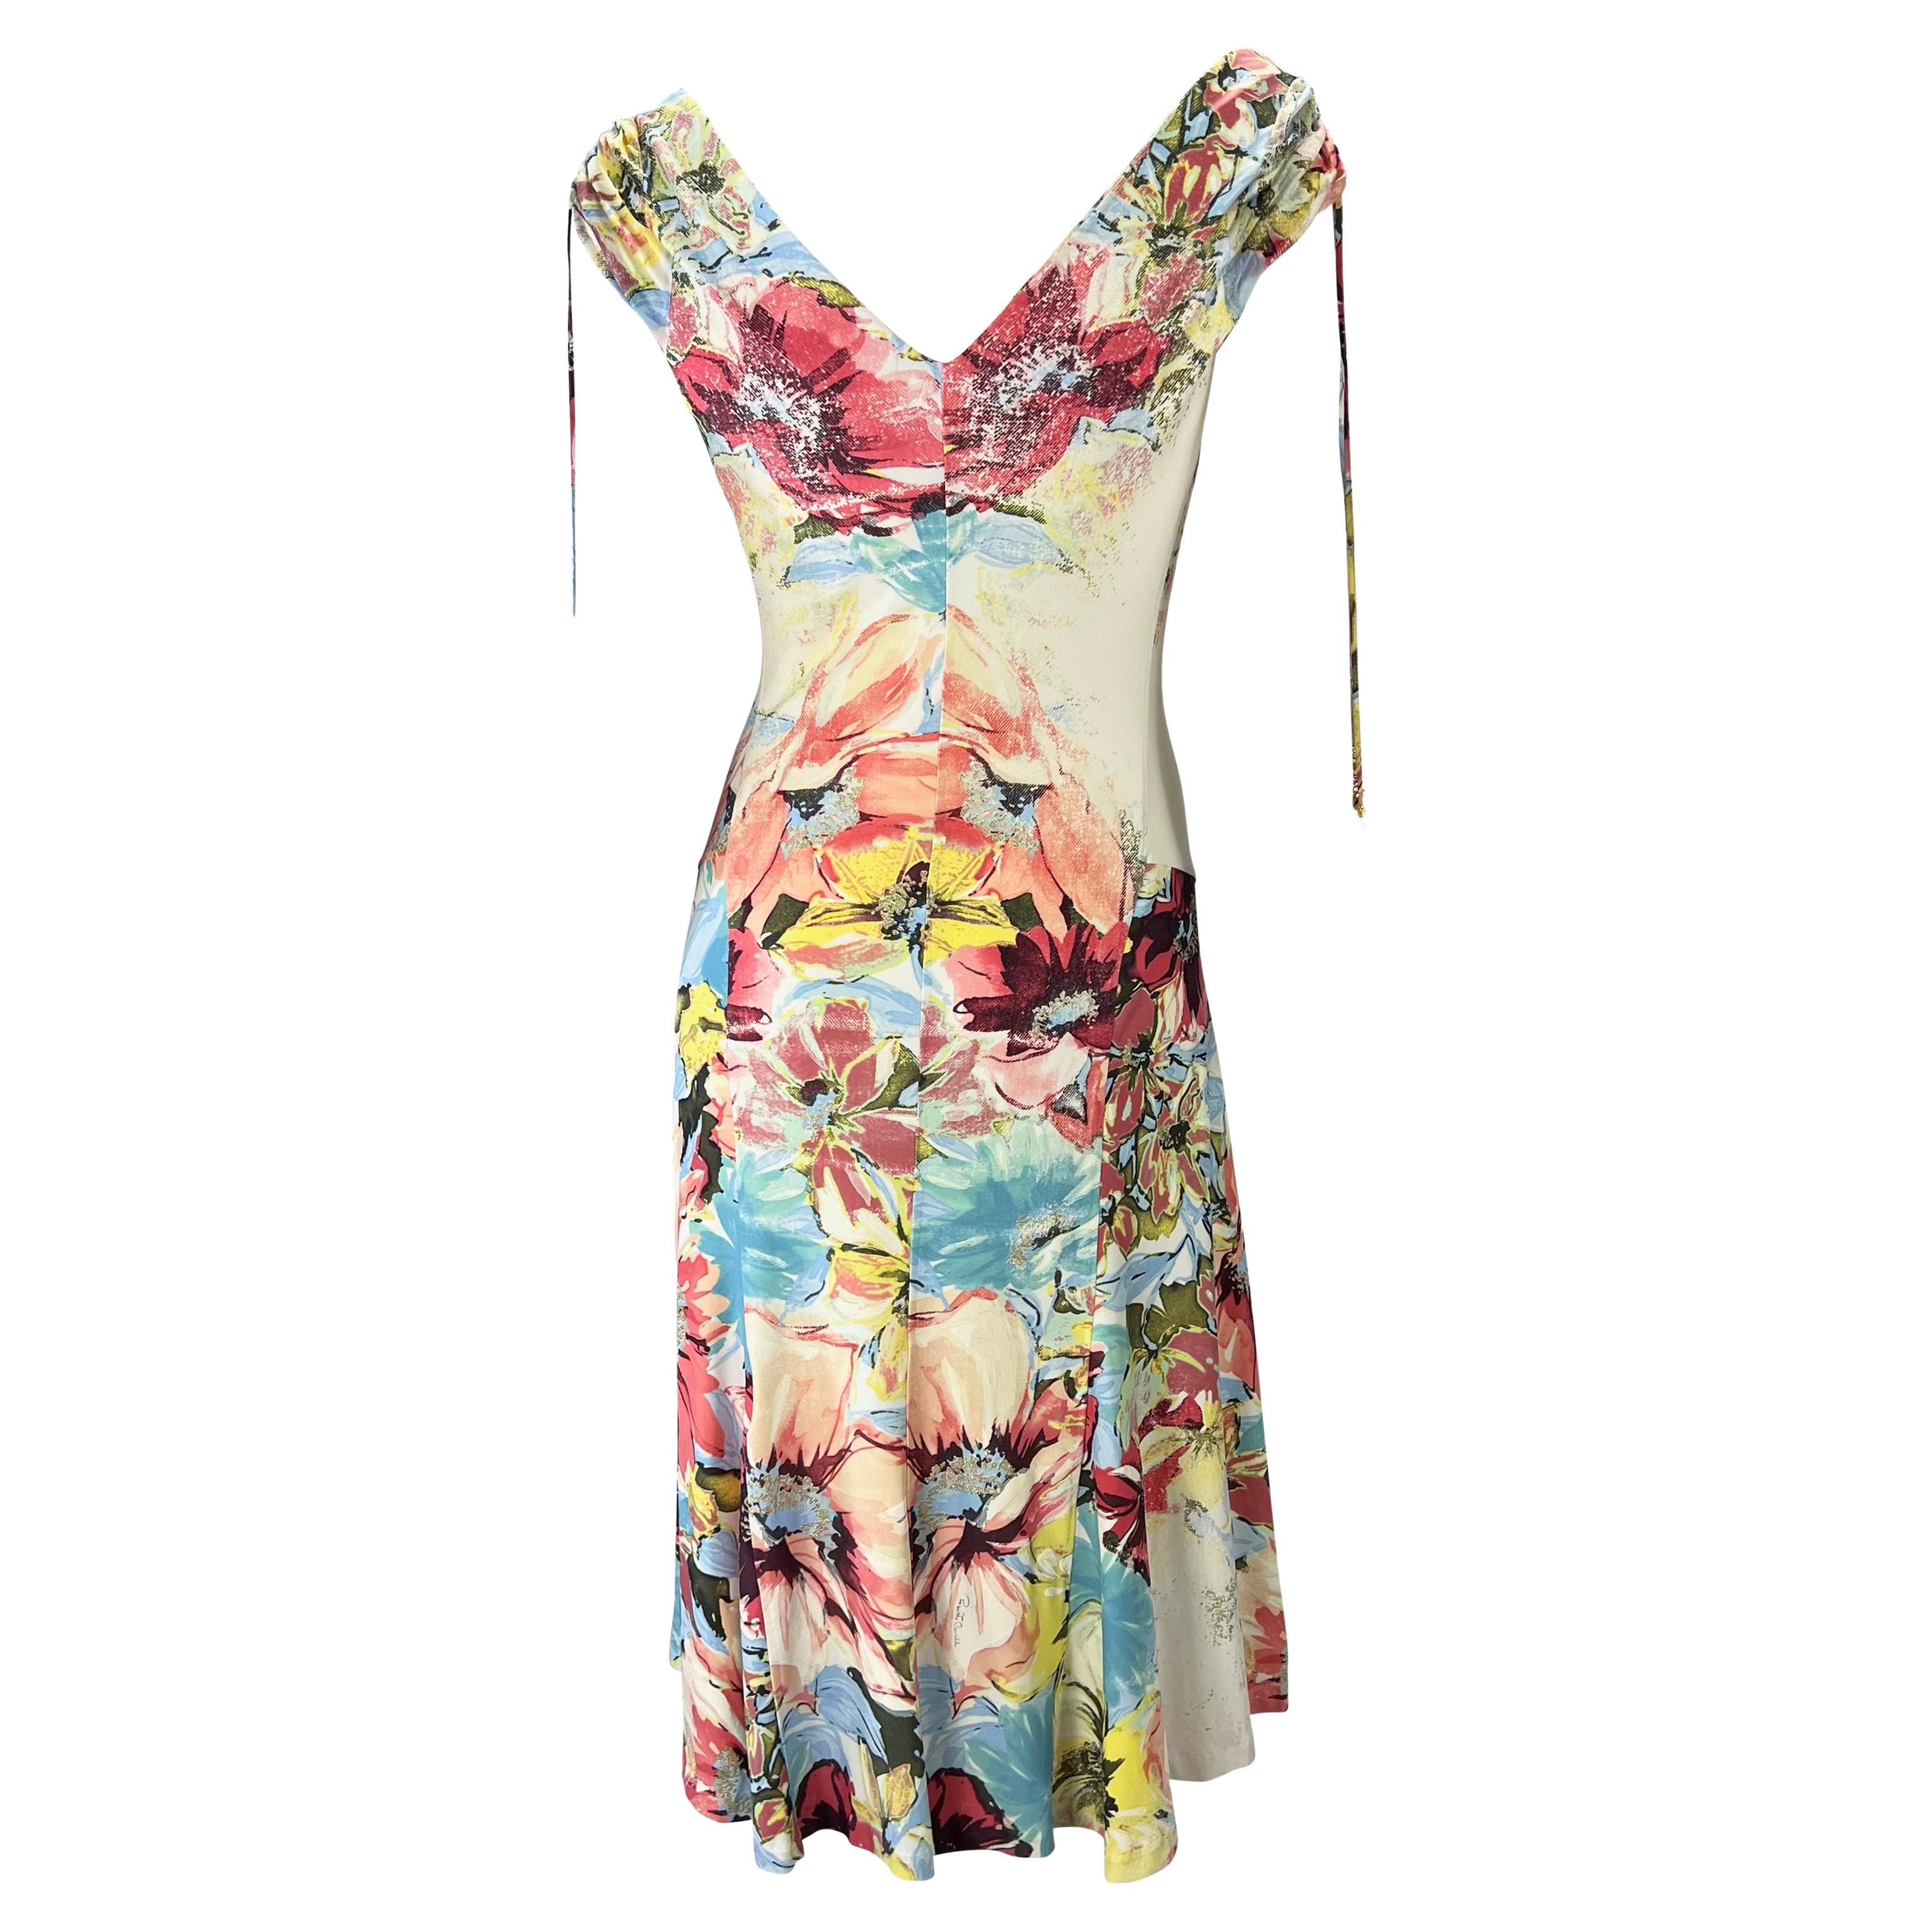 Women's S/S 2003 Roberto Cavalli Floral Abstract Watercolor Viscose Stretch Charm Dress For Sale